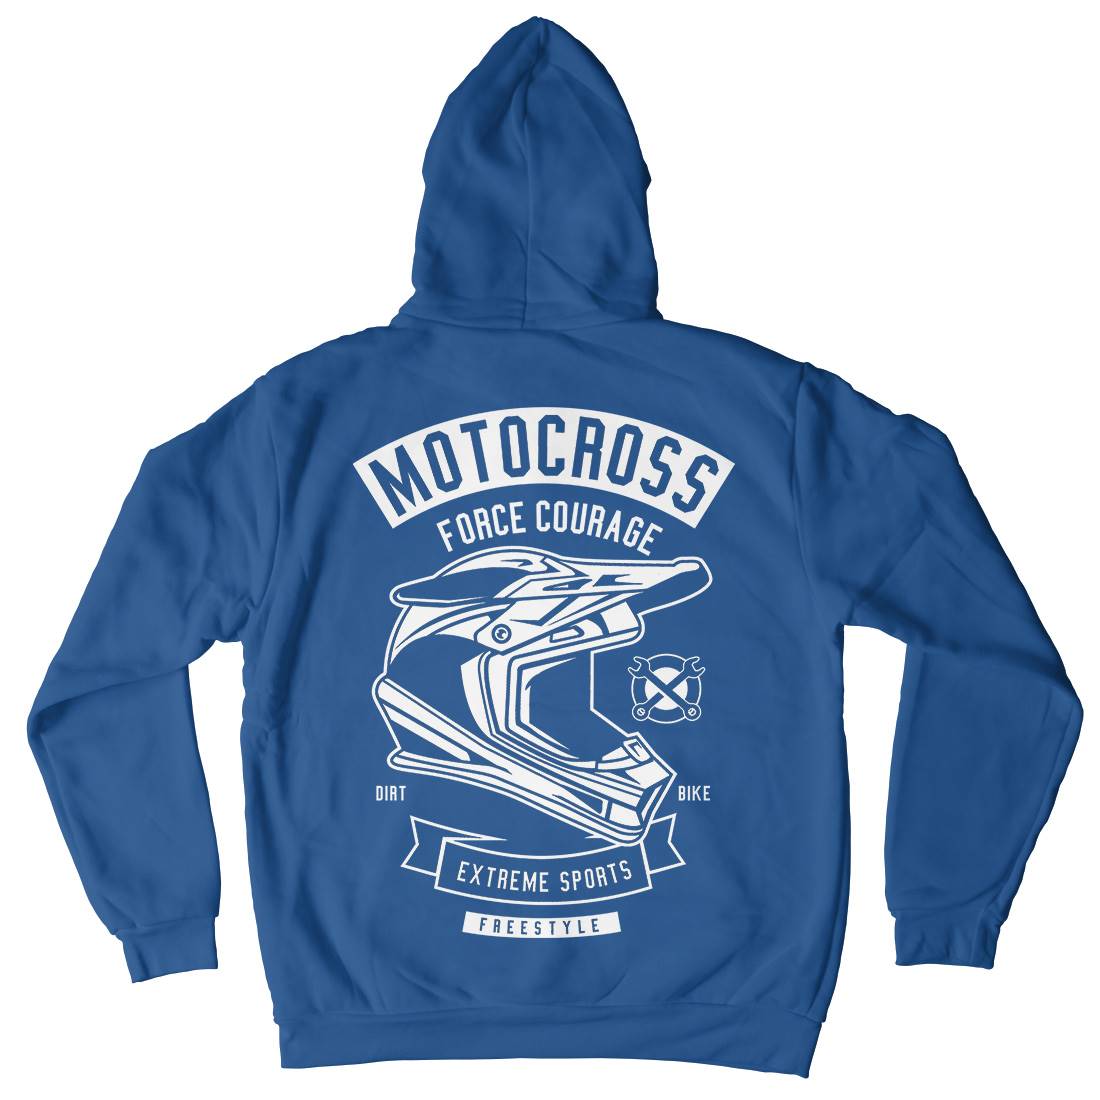 Motocross Force Courage Mens Hoodie With Pocket Motorcycles B576